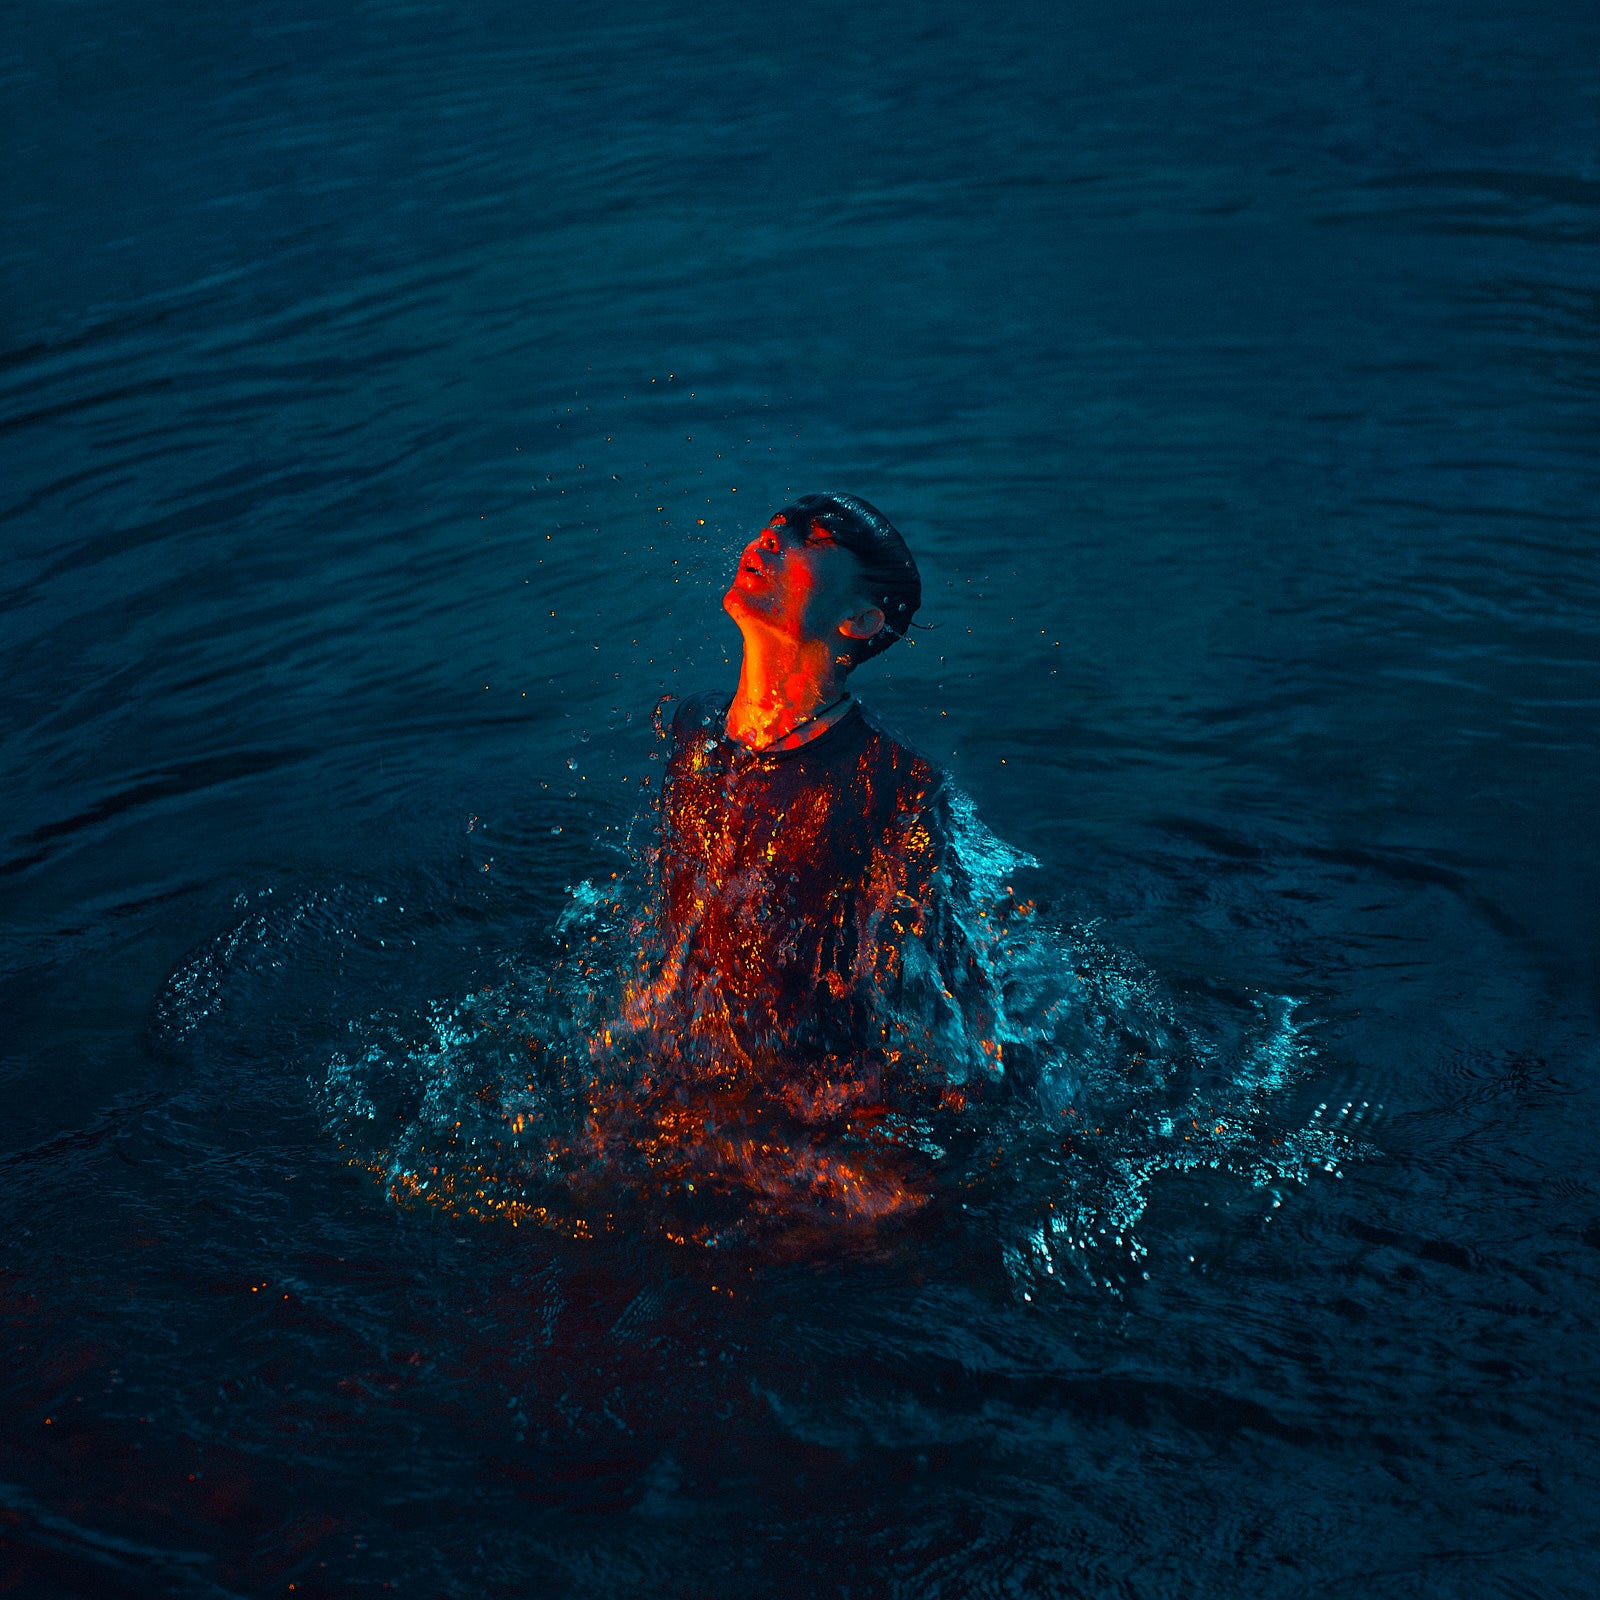 Photograph of man rising out of water with orange light on face by Adrian Wojtas